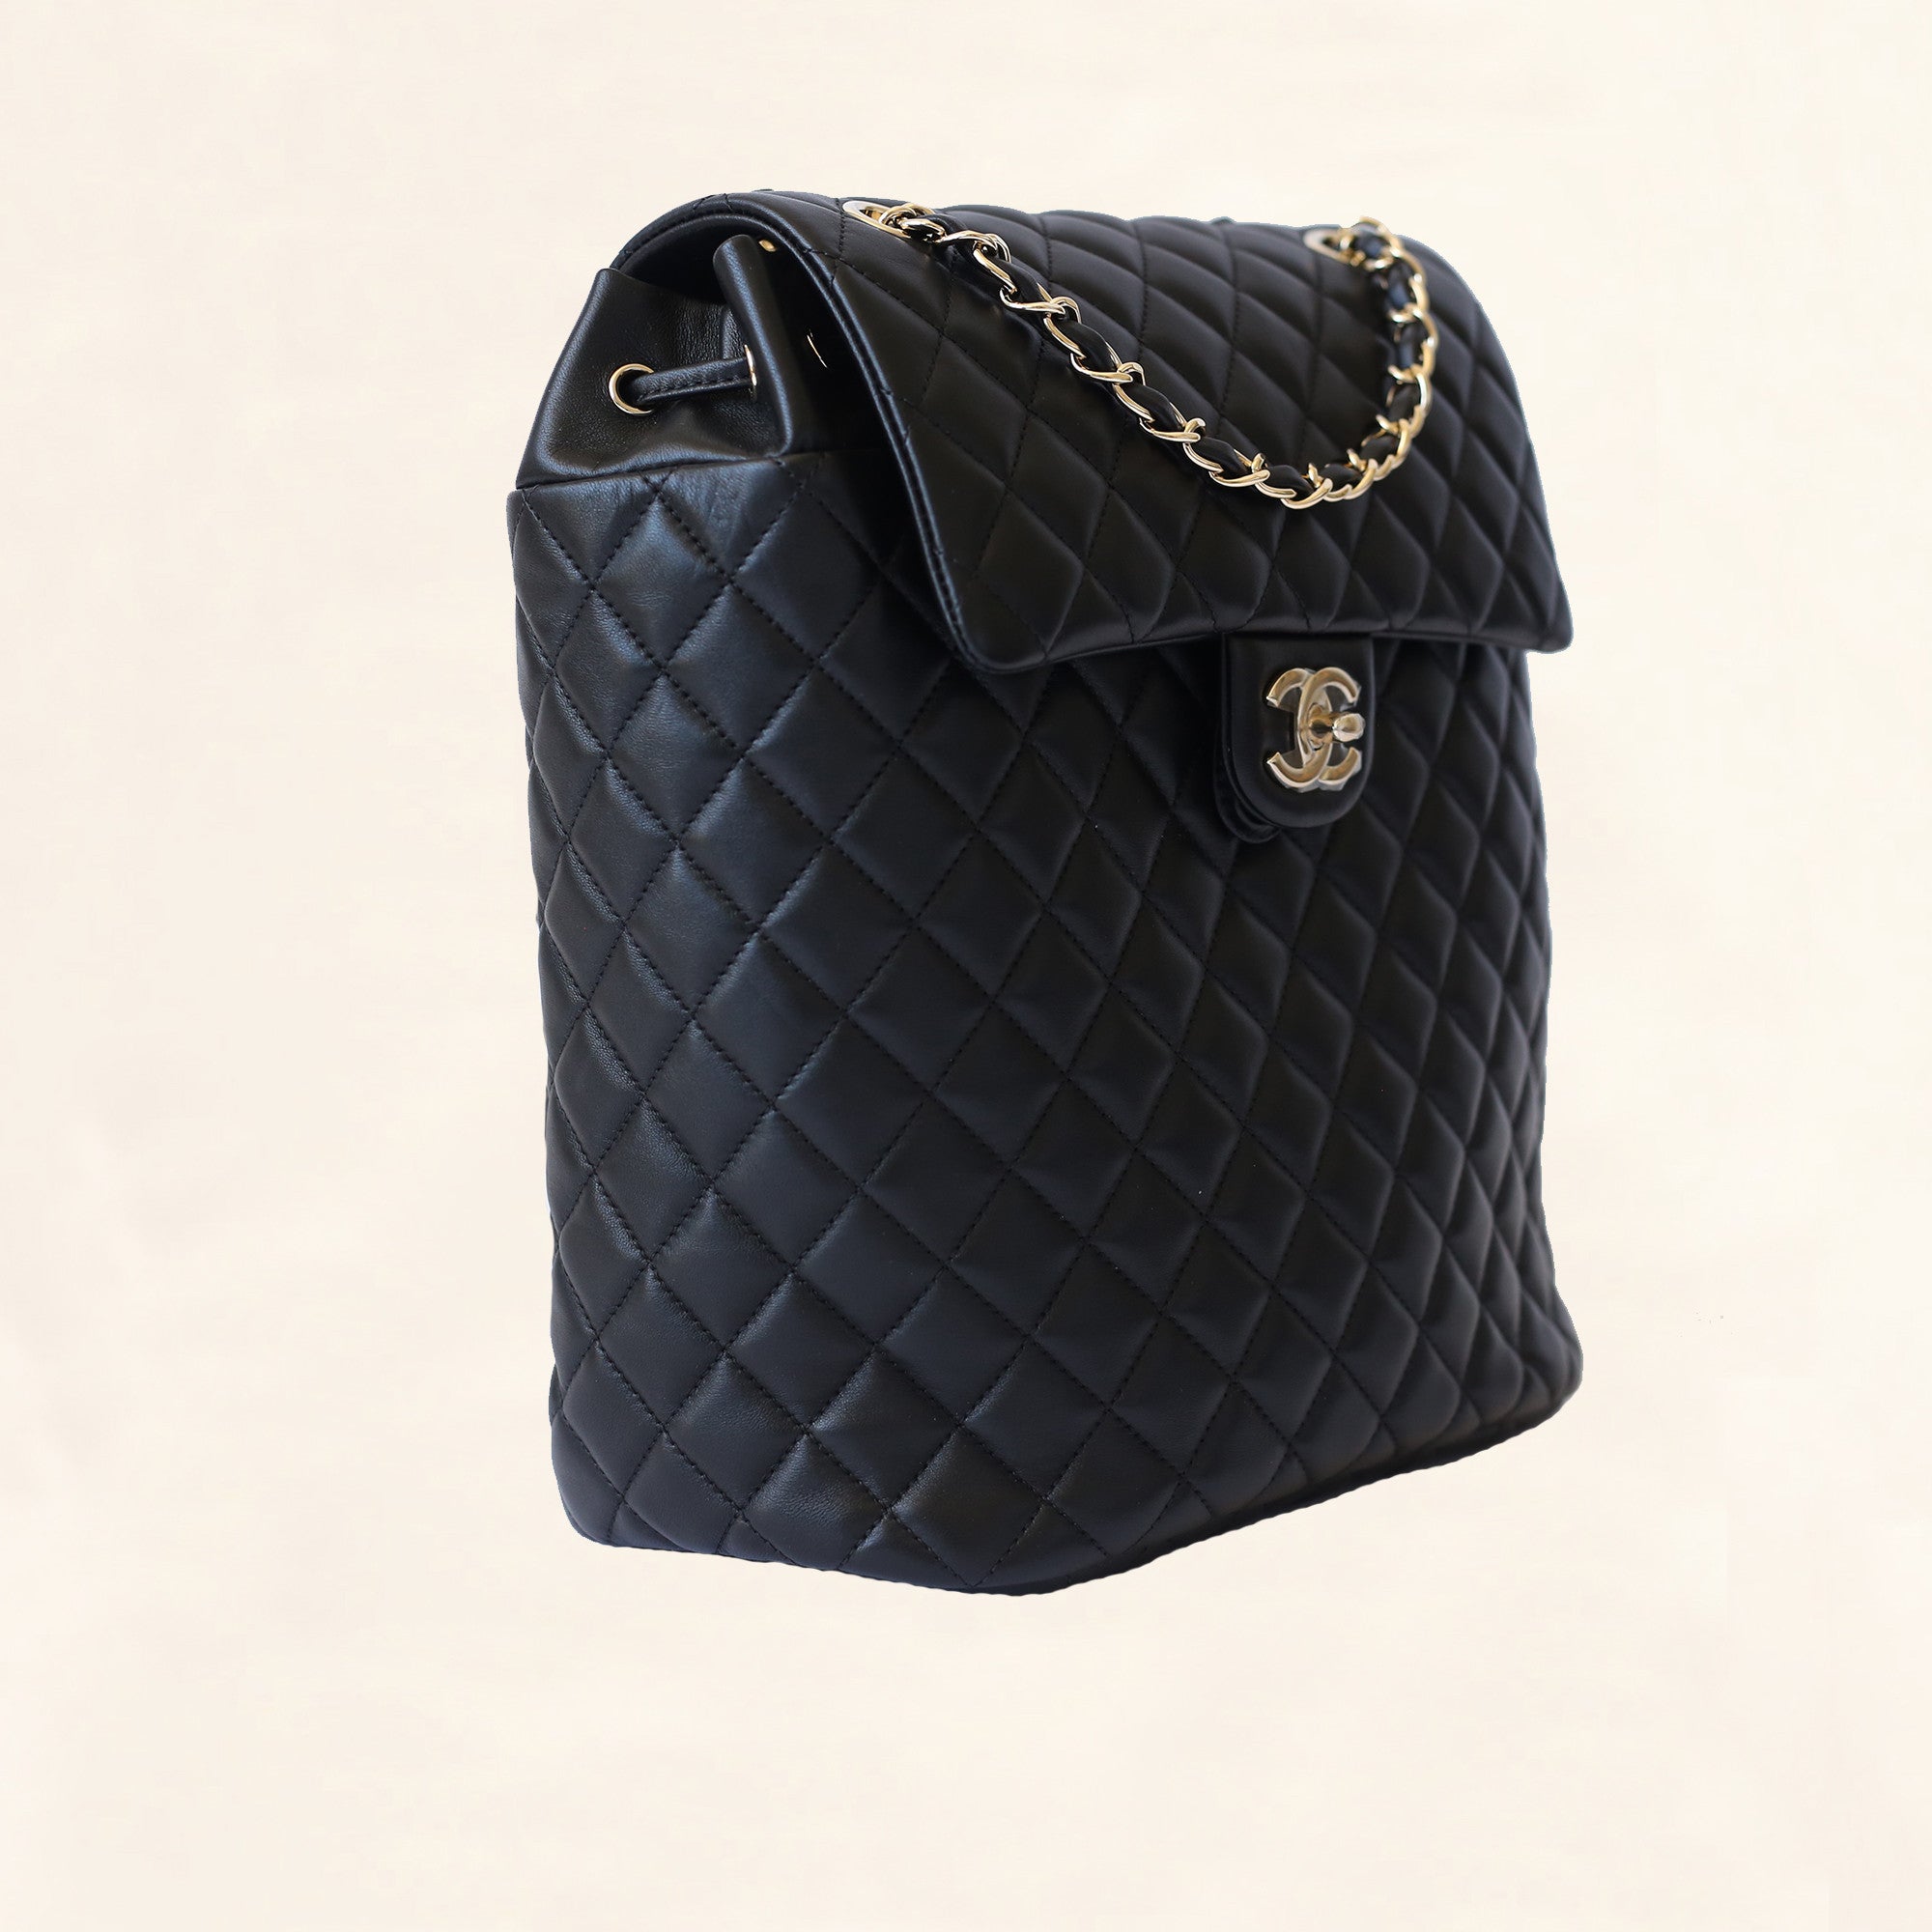 Chanel Lambskin Quilted Small Urban Spirit Backpack Black Leather